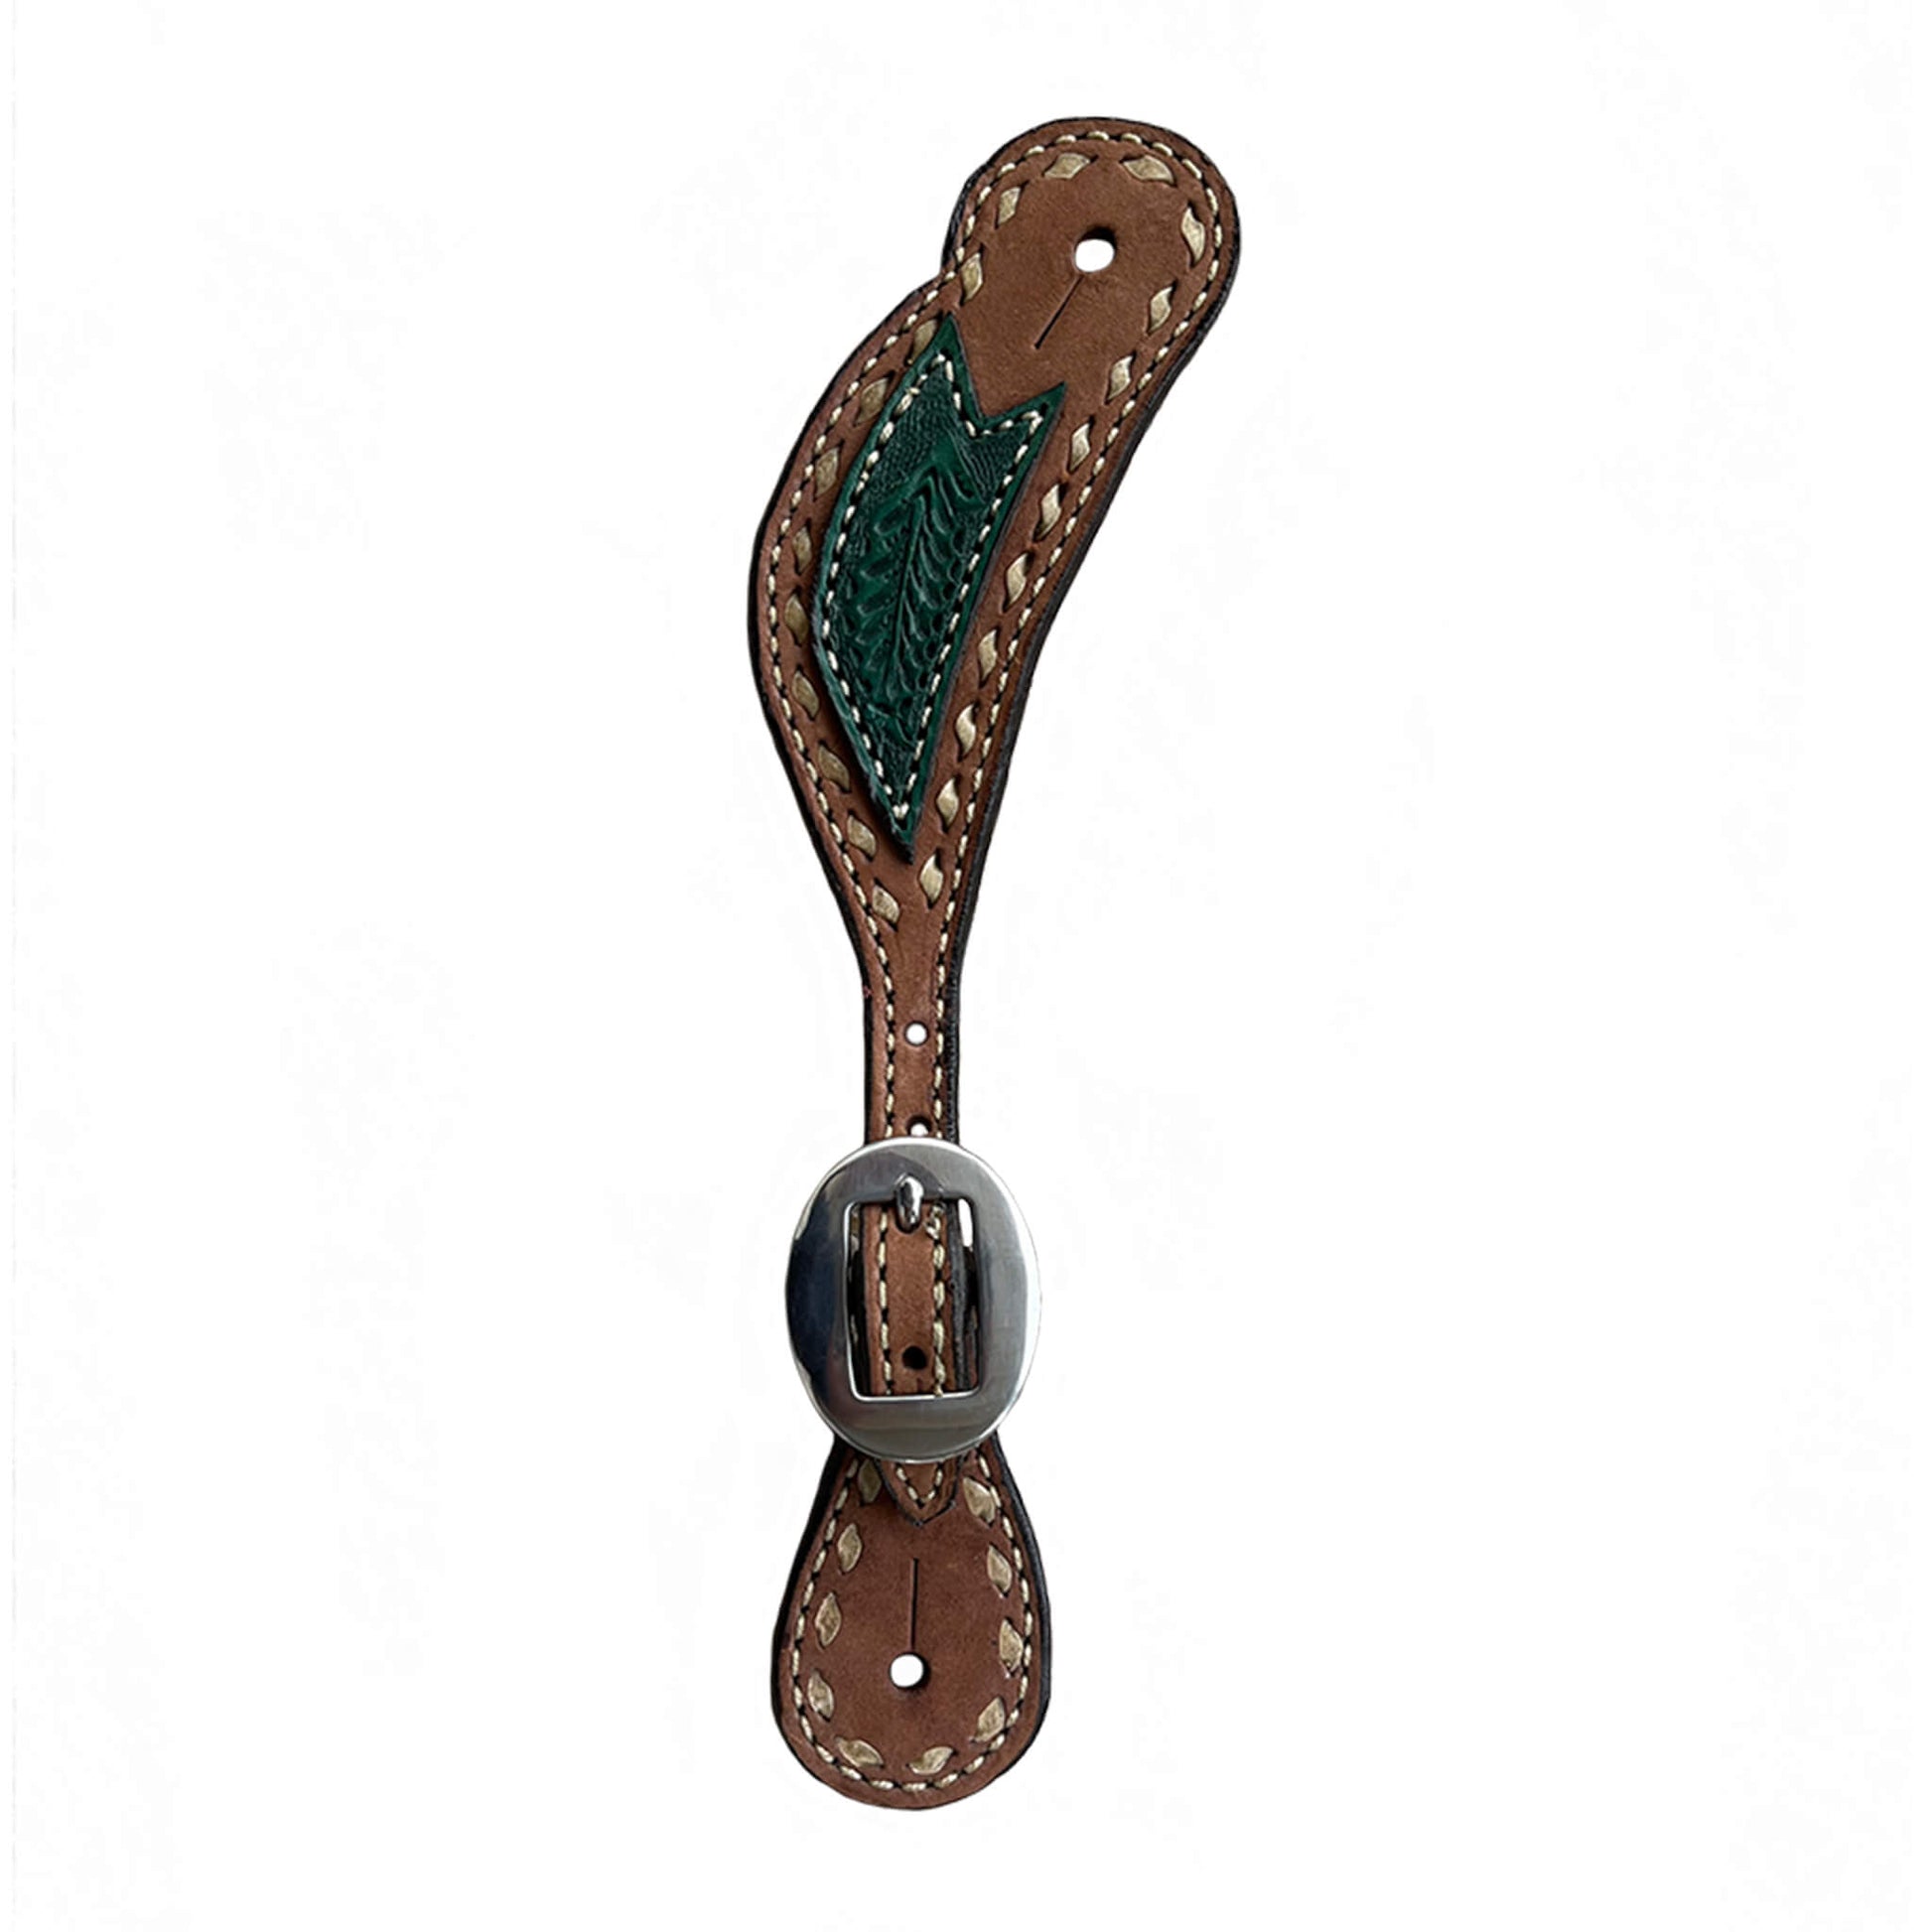 Ladies spur straps rough out chocolate leather with turquoise oak leaf tooled patch and rawhide lace buckstitch. 